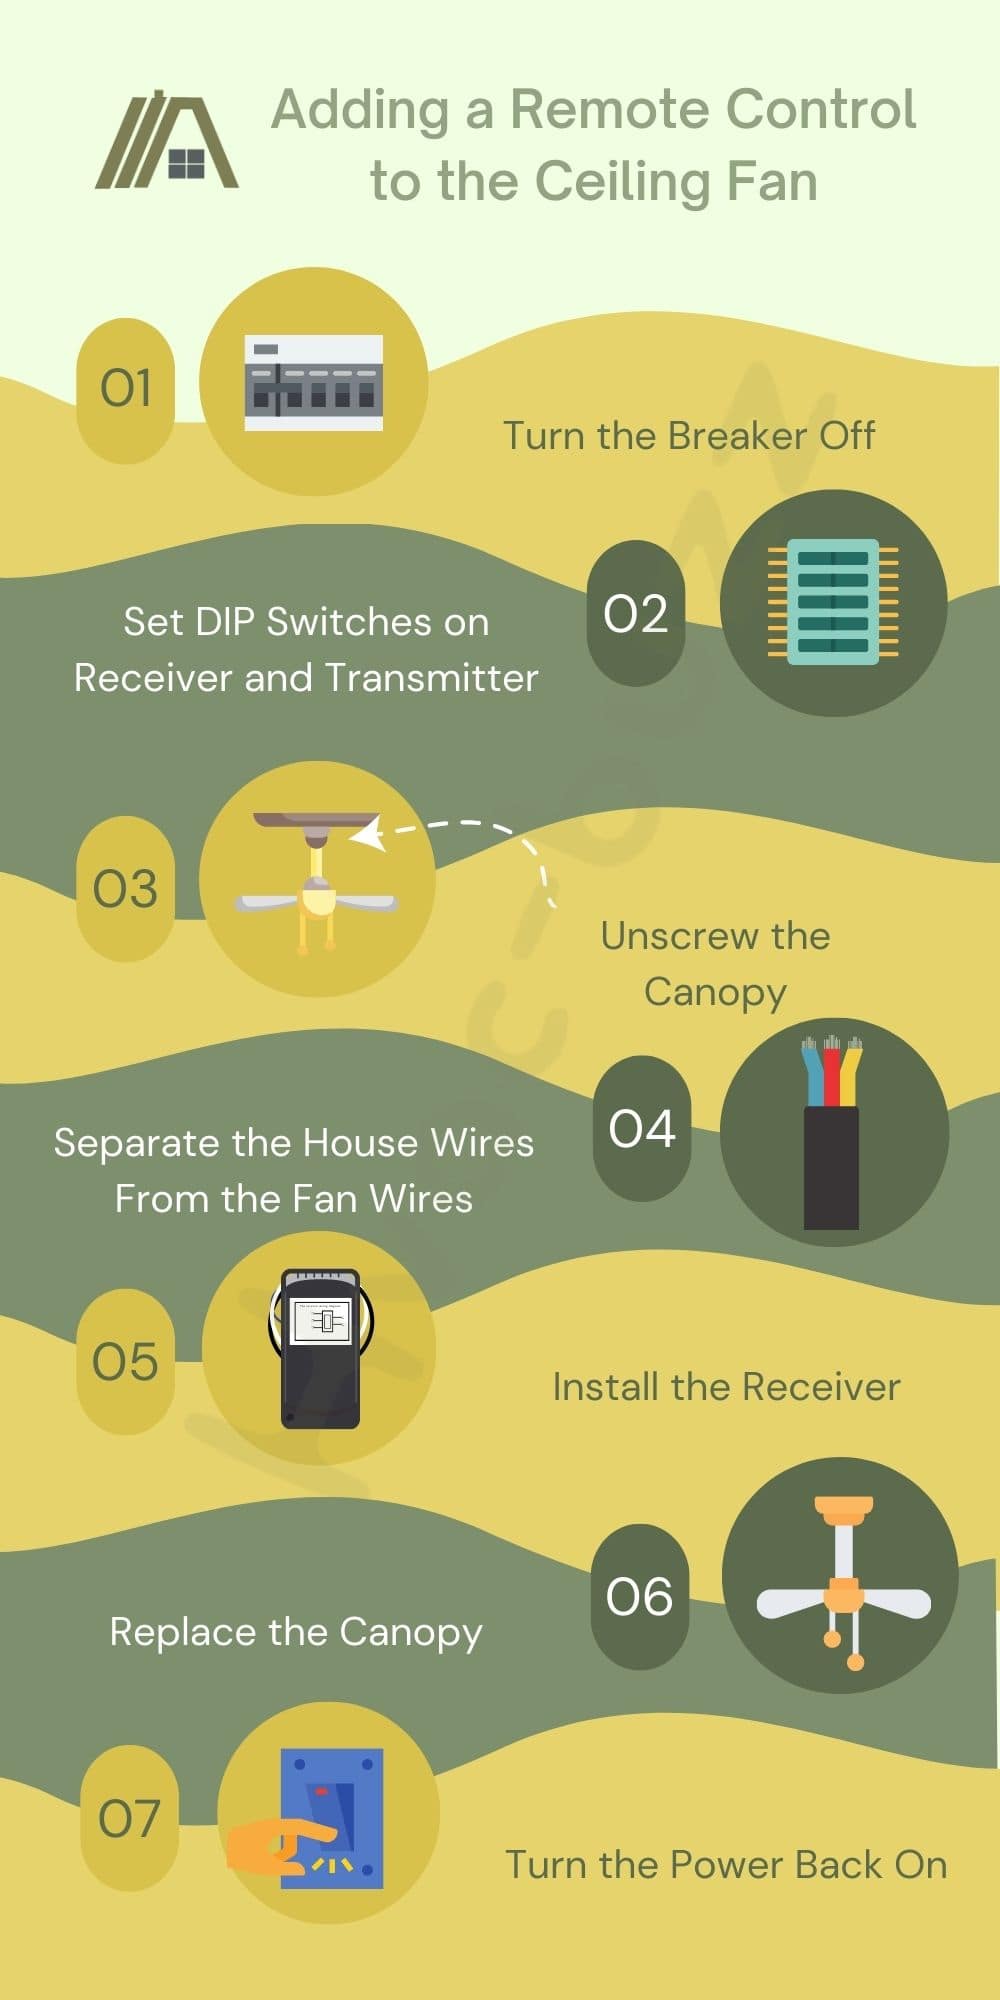 Infographic about adding a Remote Control to an Existing Ceiling Fan